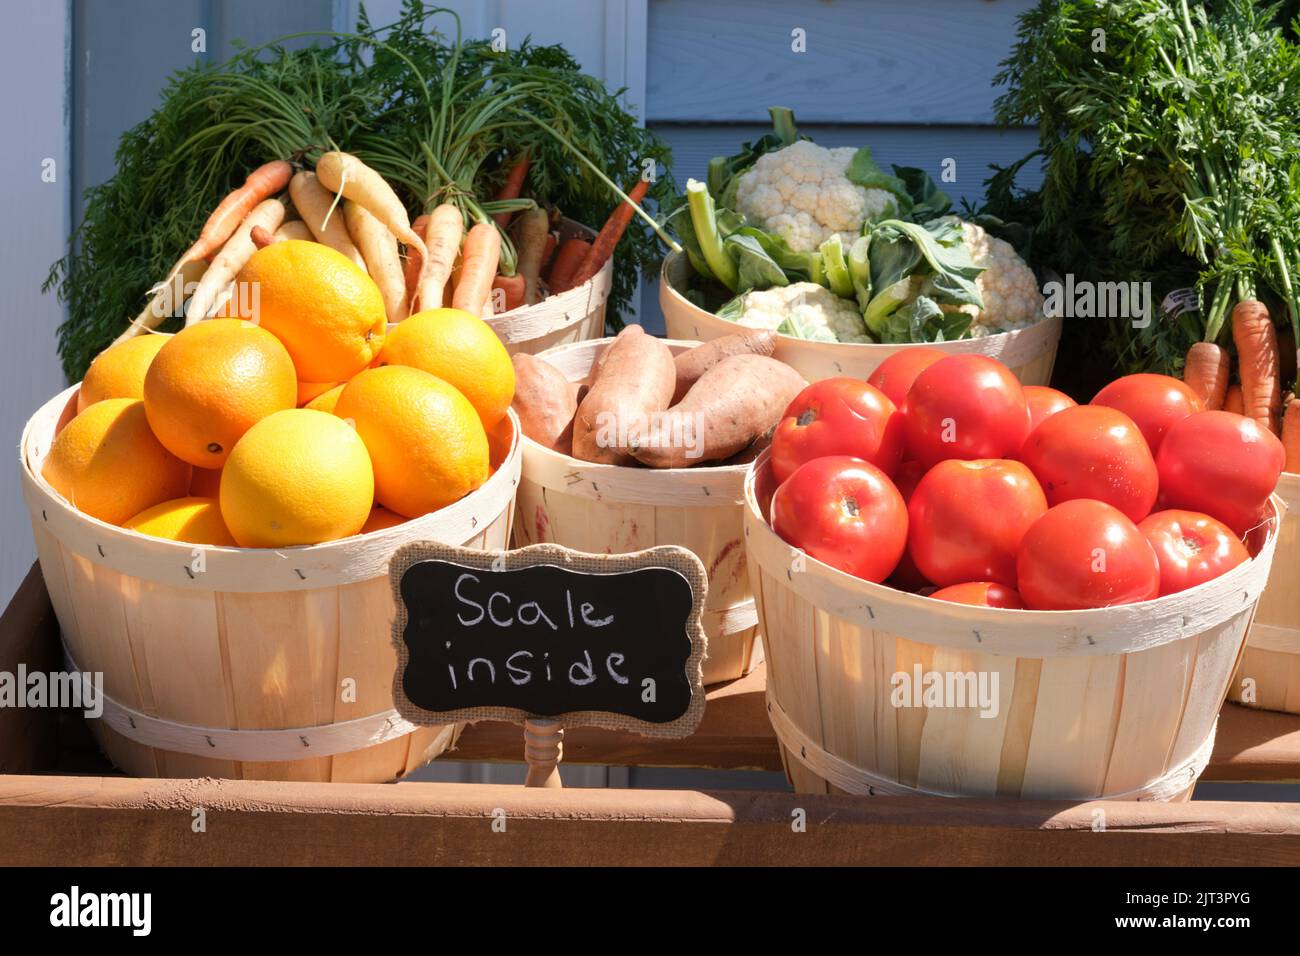 Vegetable and fruit market outdoors display in baskets outside Stock Photo